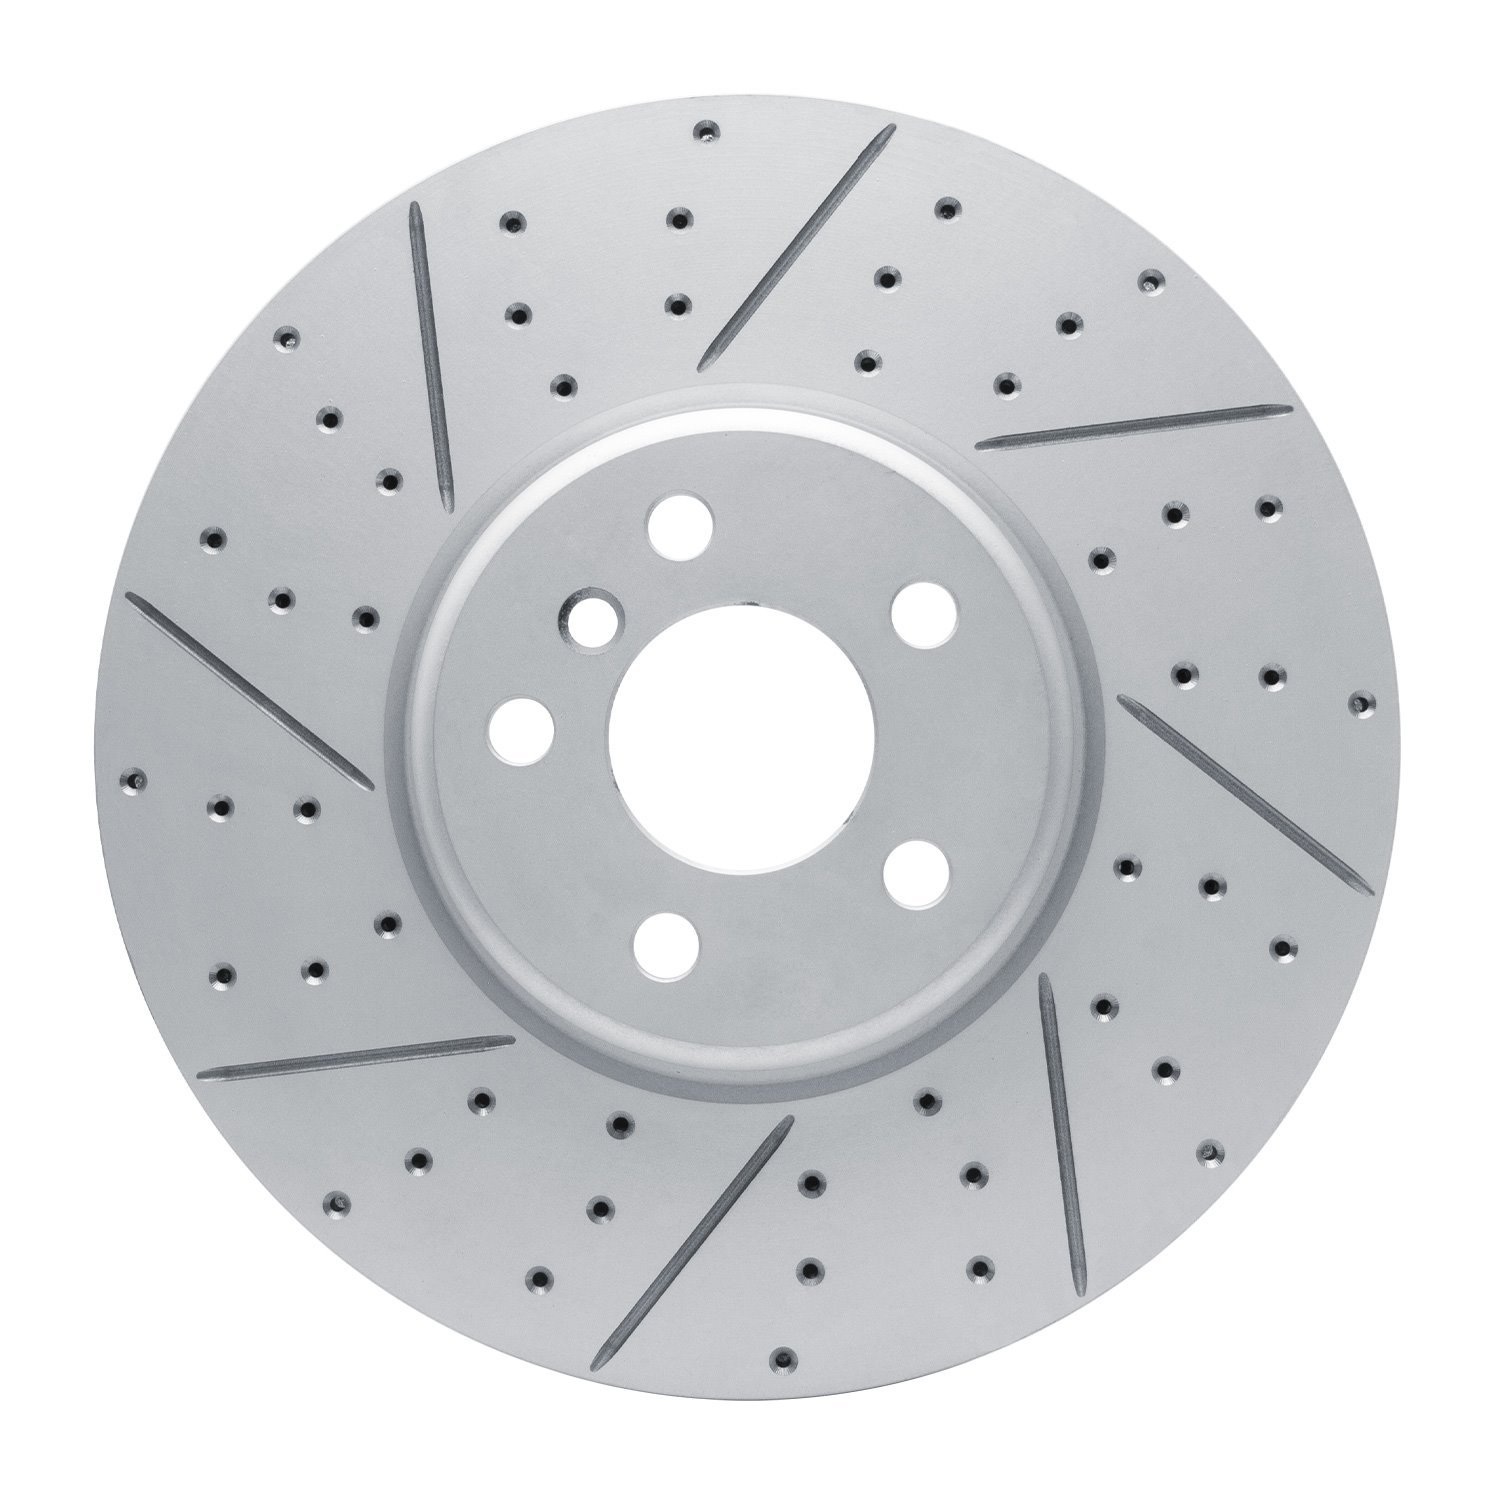 830-31133D Geoperformance Drilled/Slotted Brake Rotor, Fits Select Multiple Makes/Models, Position: Right Front